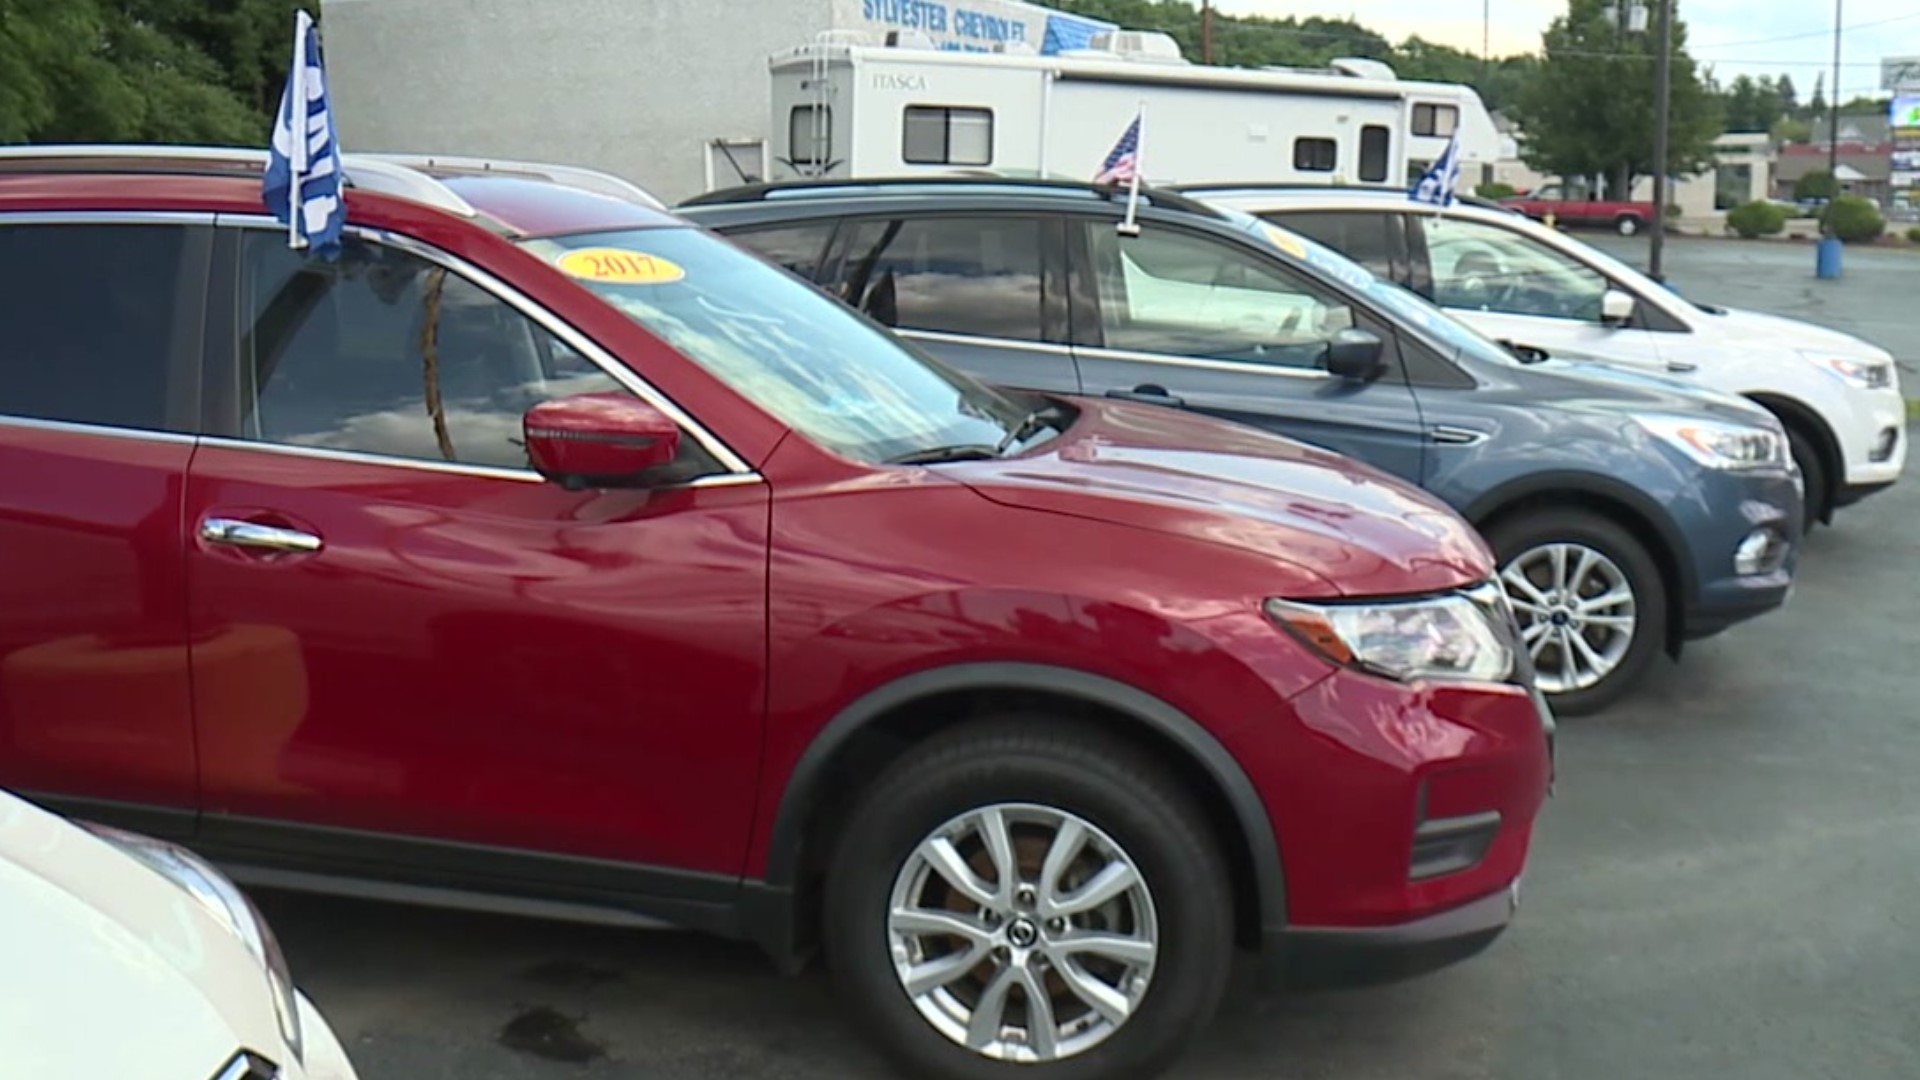 It's been tough finding new and used cars over the past few months. But, as Newswatch 16's Sarah Buynovsky reports, the shortage appears to be ending.